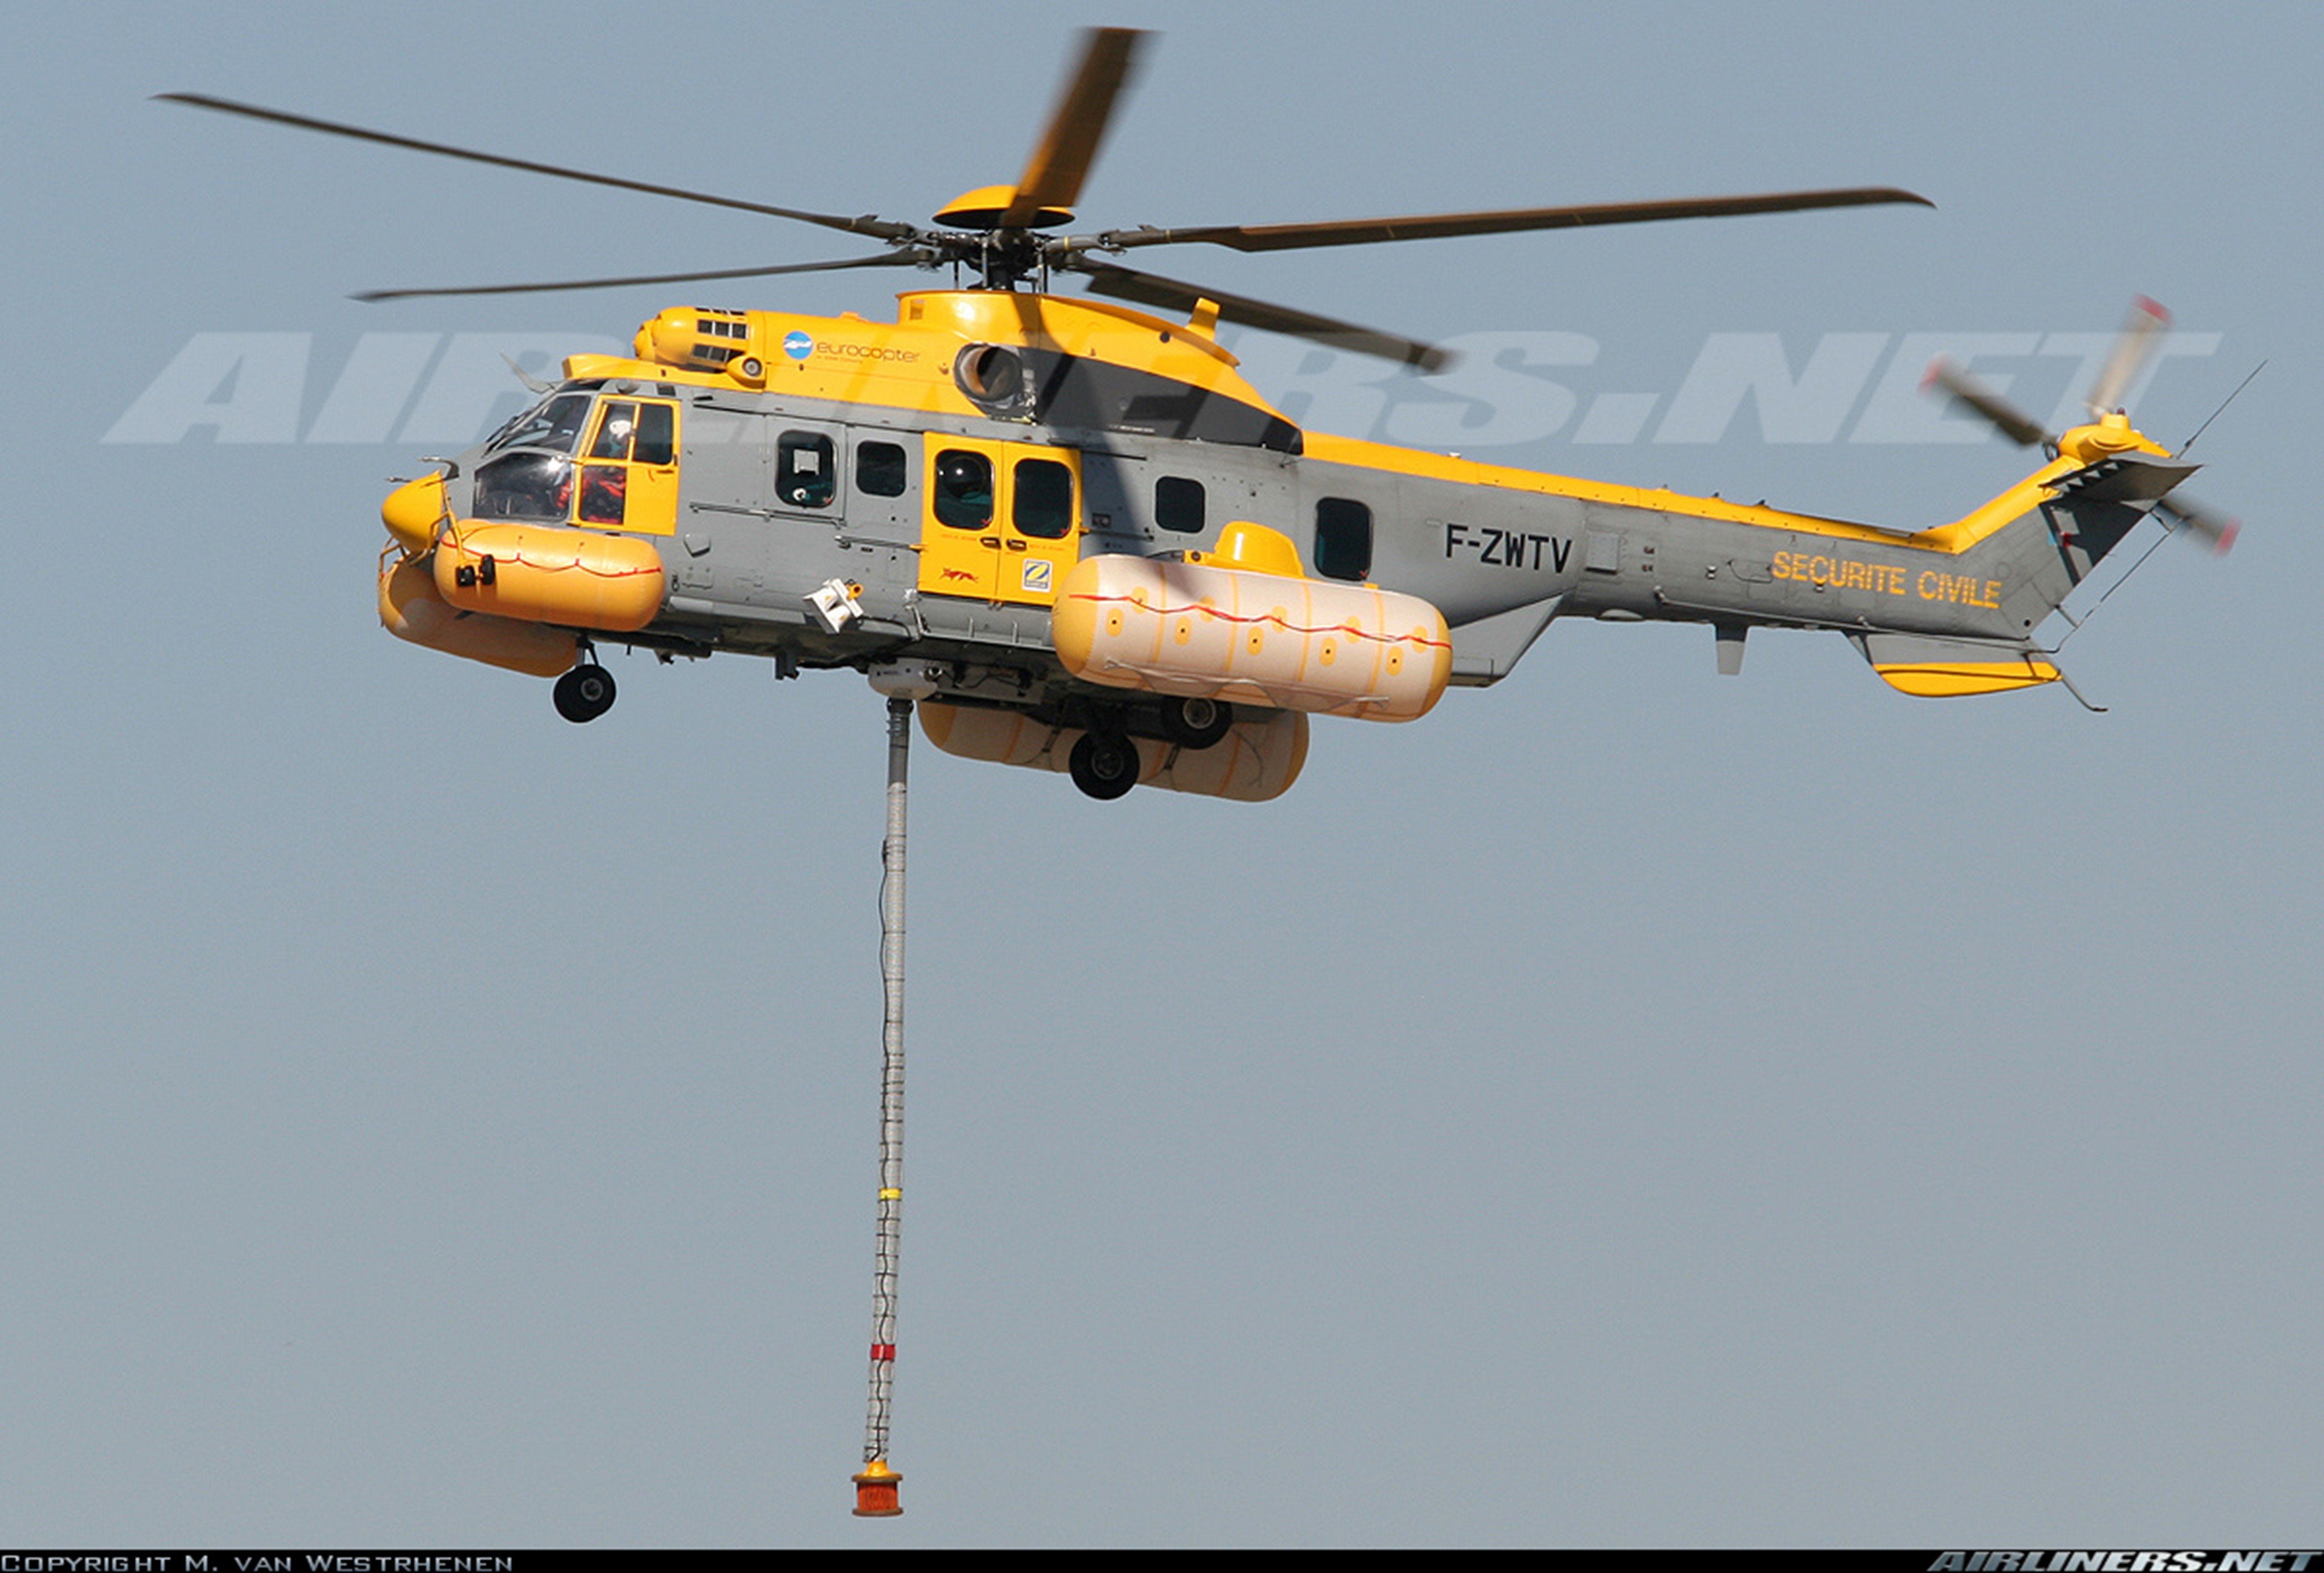 helicopter, Aircraft, Vehicle, Rescue, Fire, Eurocopter Wallpaper